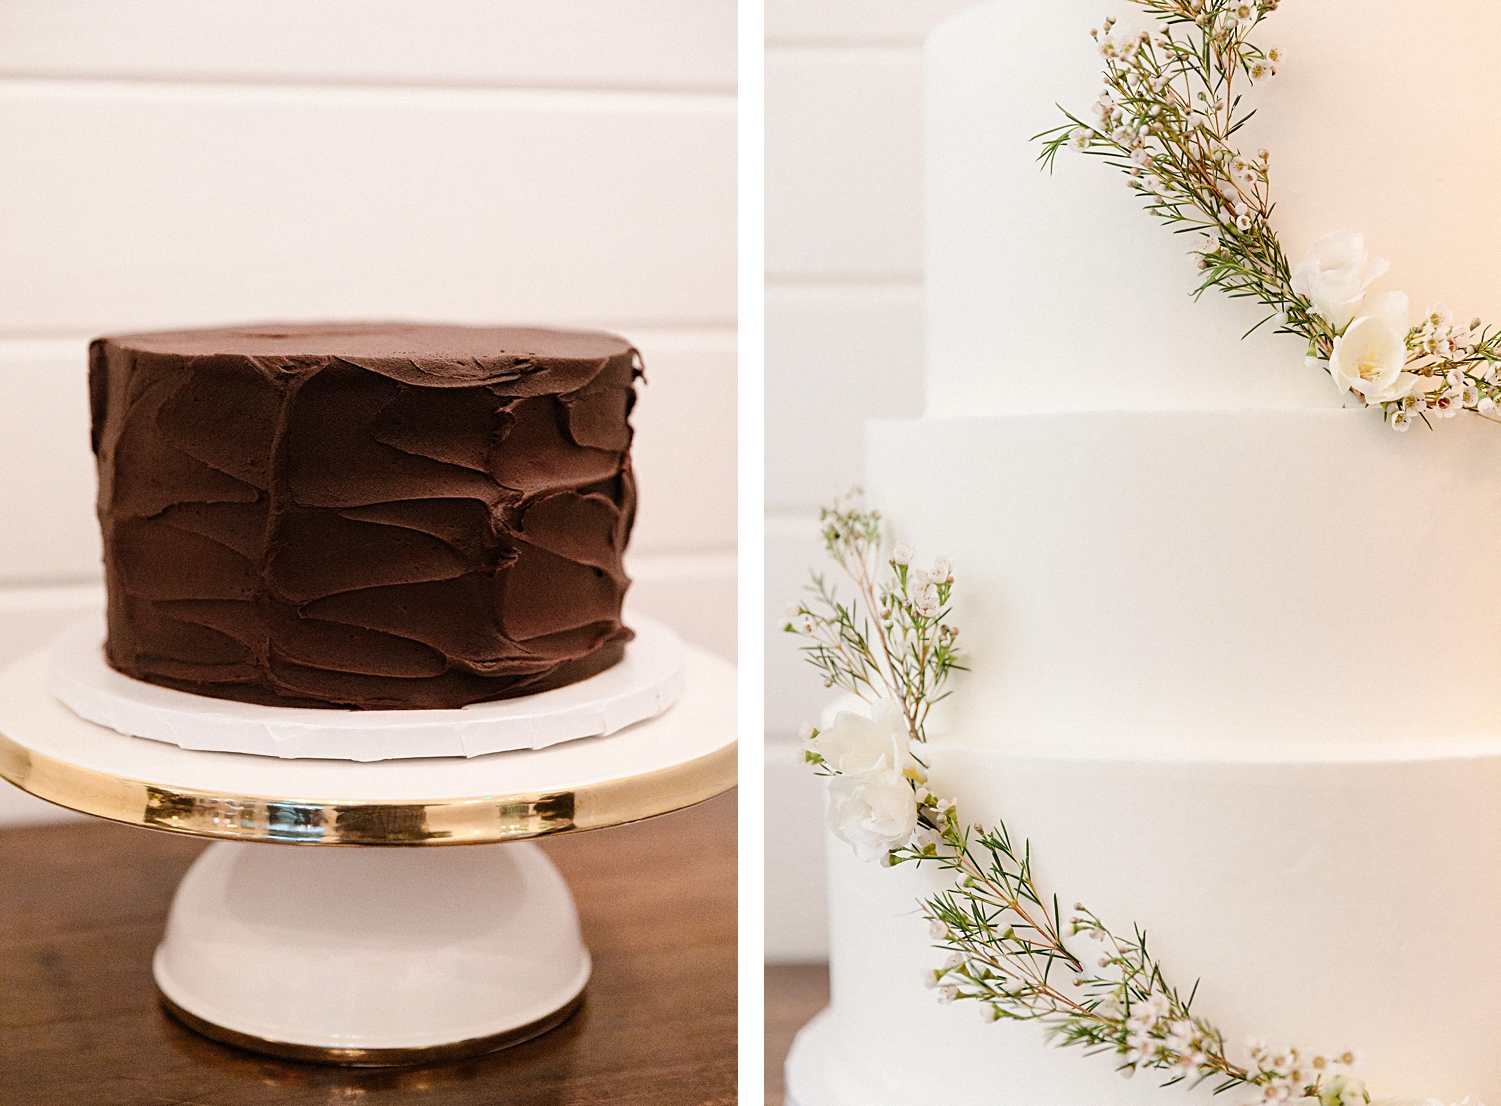 white five tier wedding cake and chocolate cakes